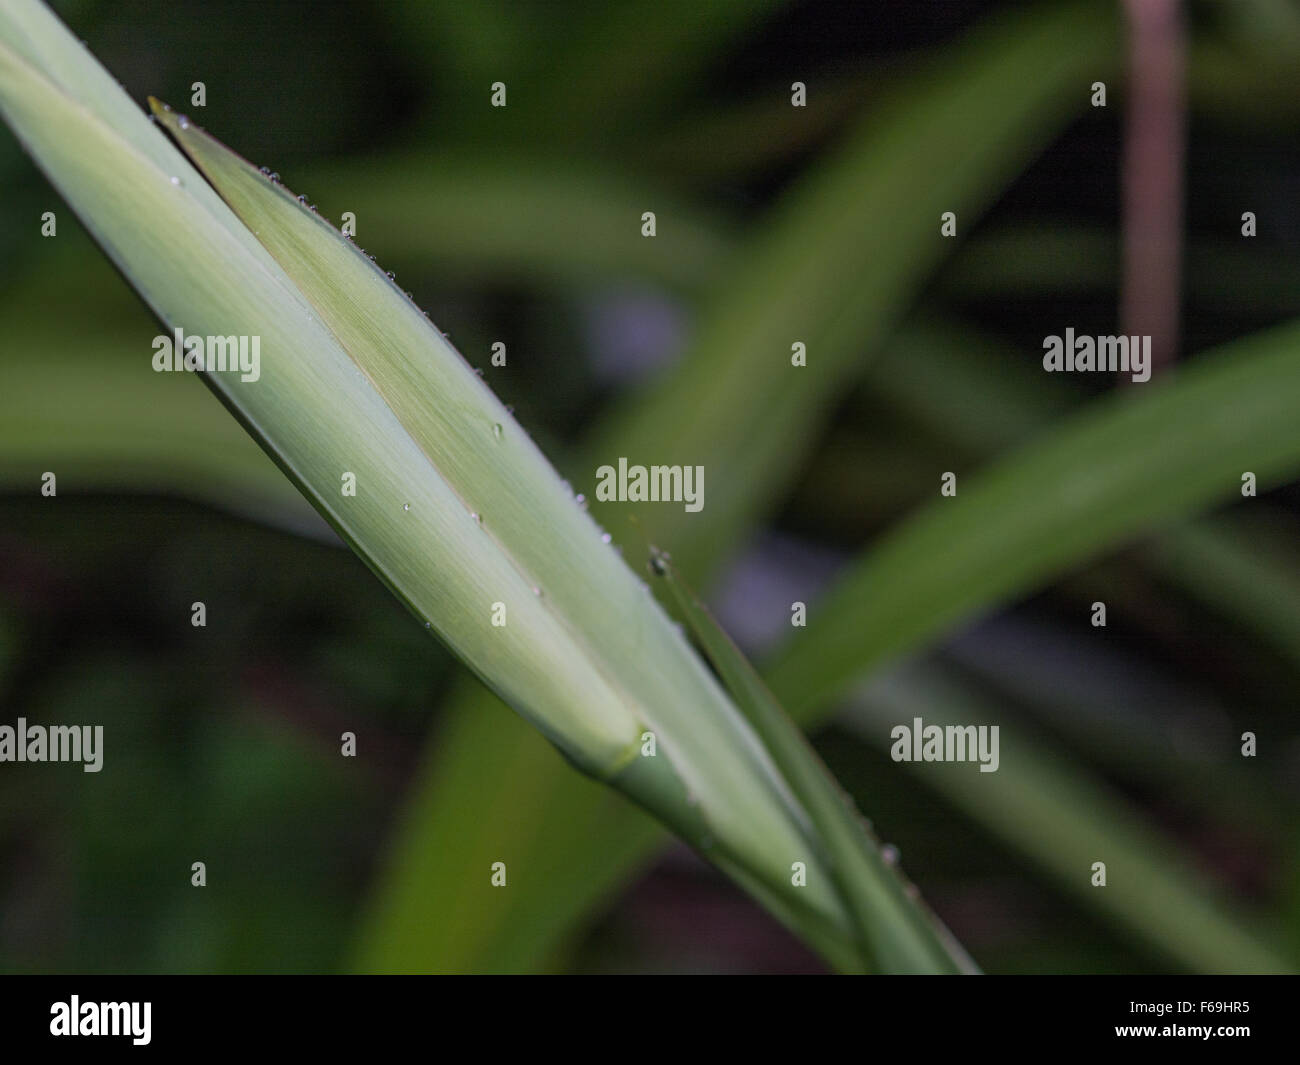 Abstract Pattern, Green Curves, Plant Leaves, Stock Photo